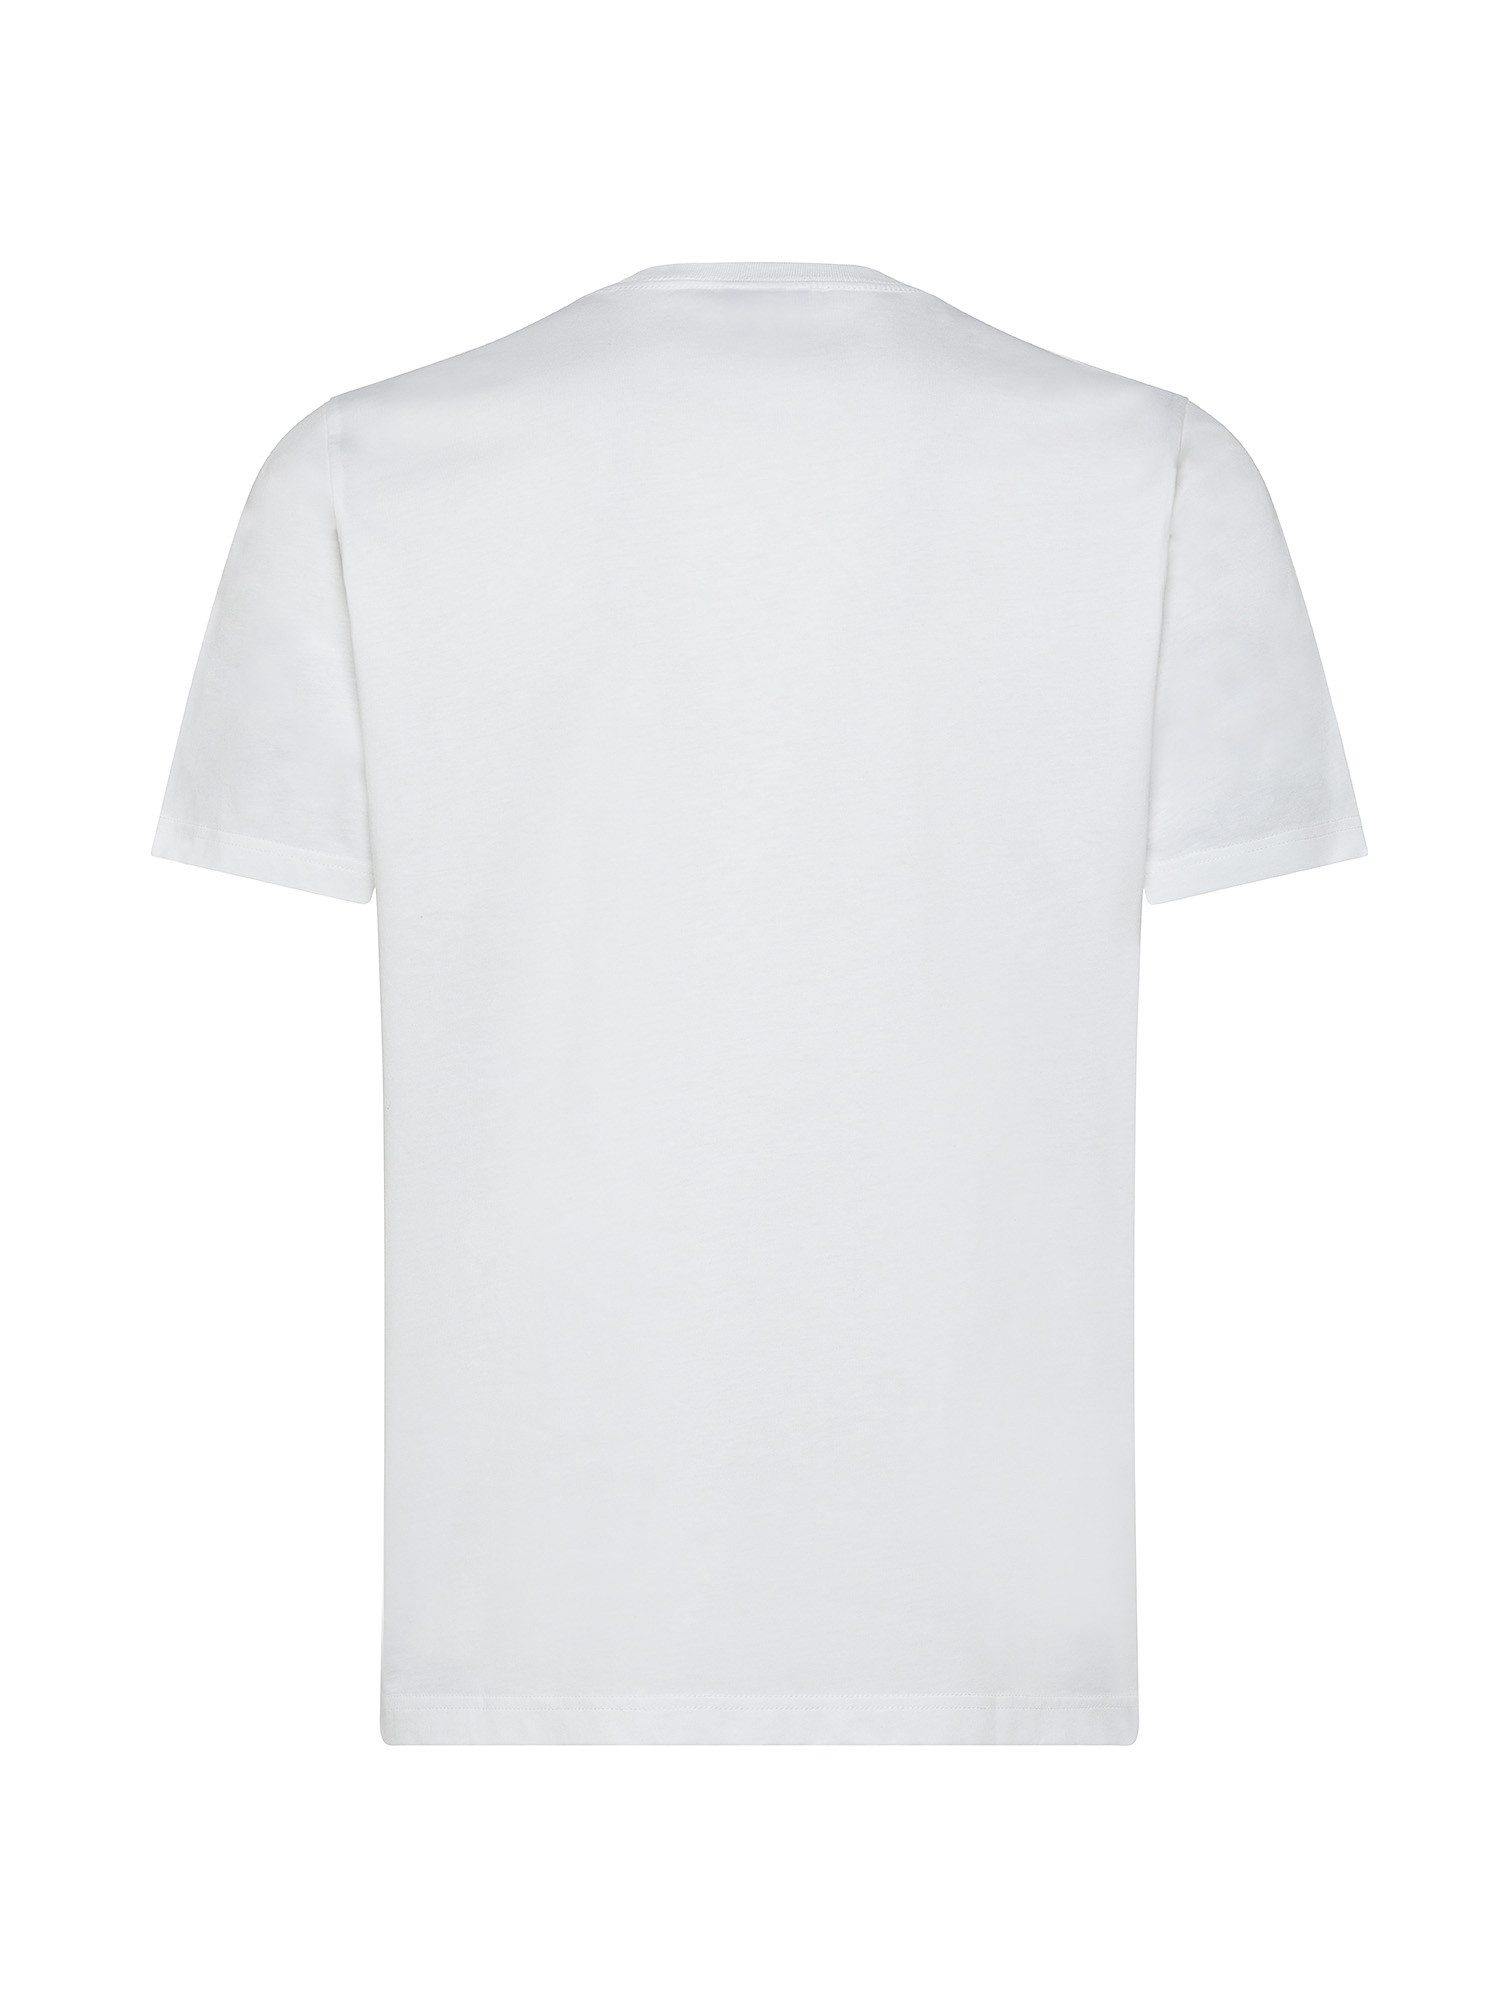 Paul Smith - T-shirt in cotone con stampa Zebra, Bianco, large image number 1